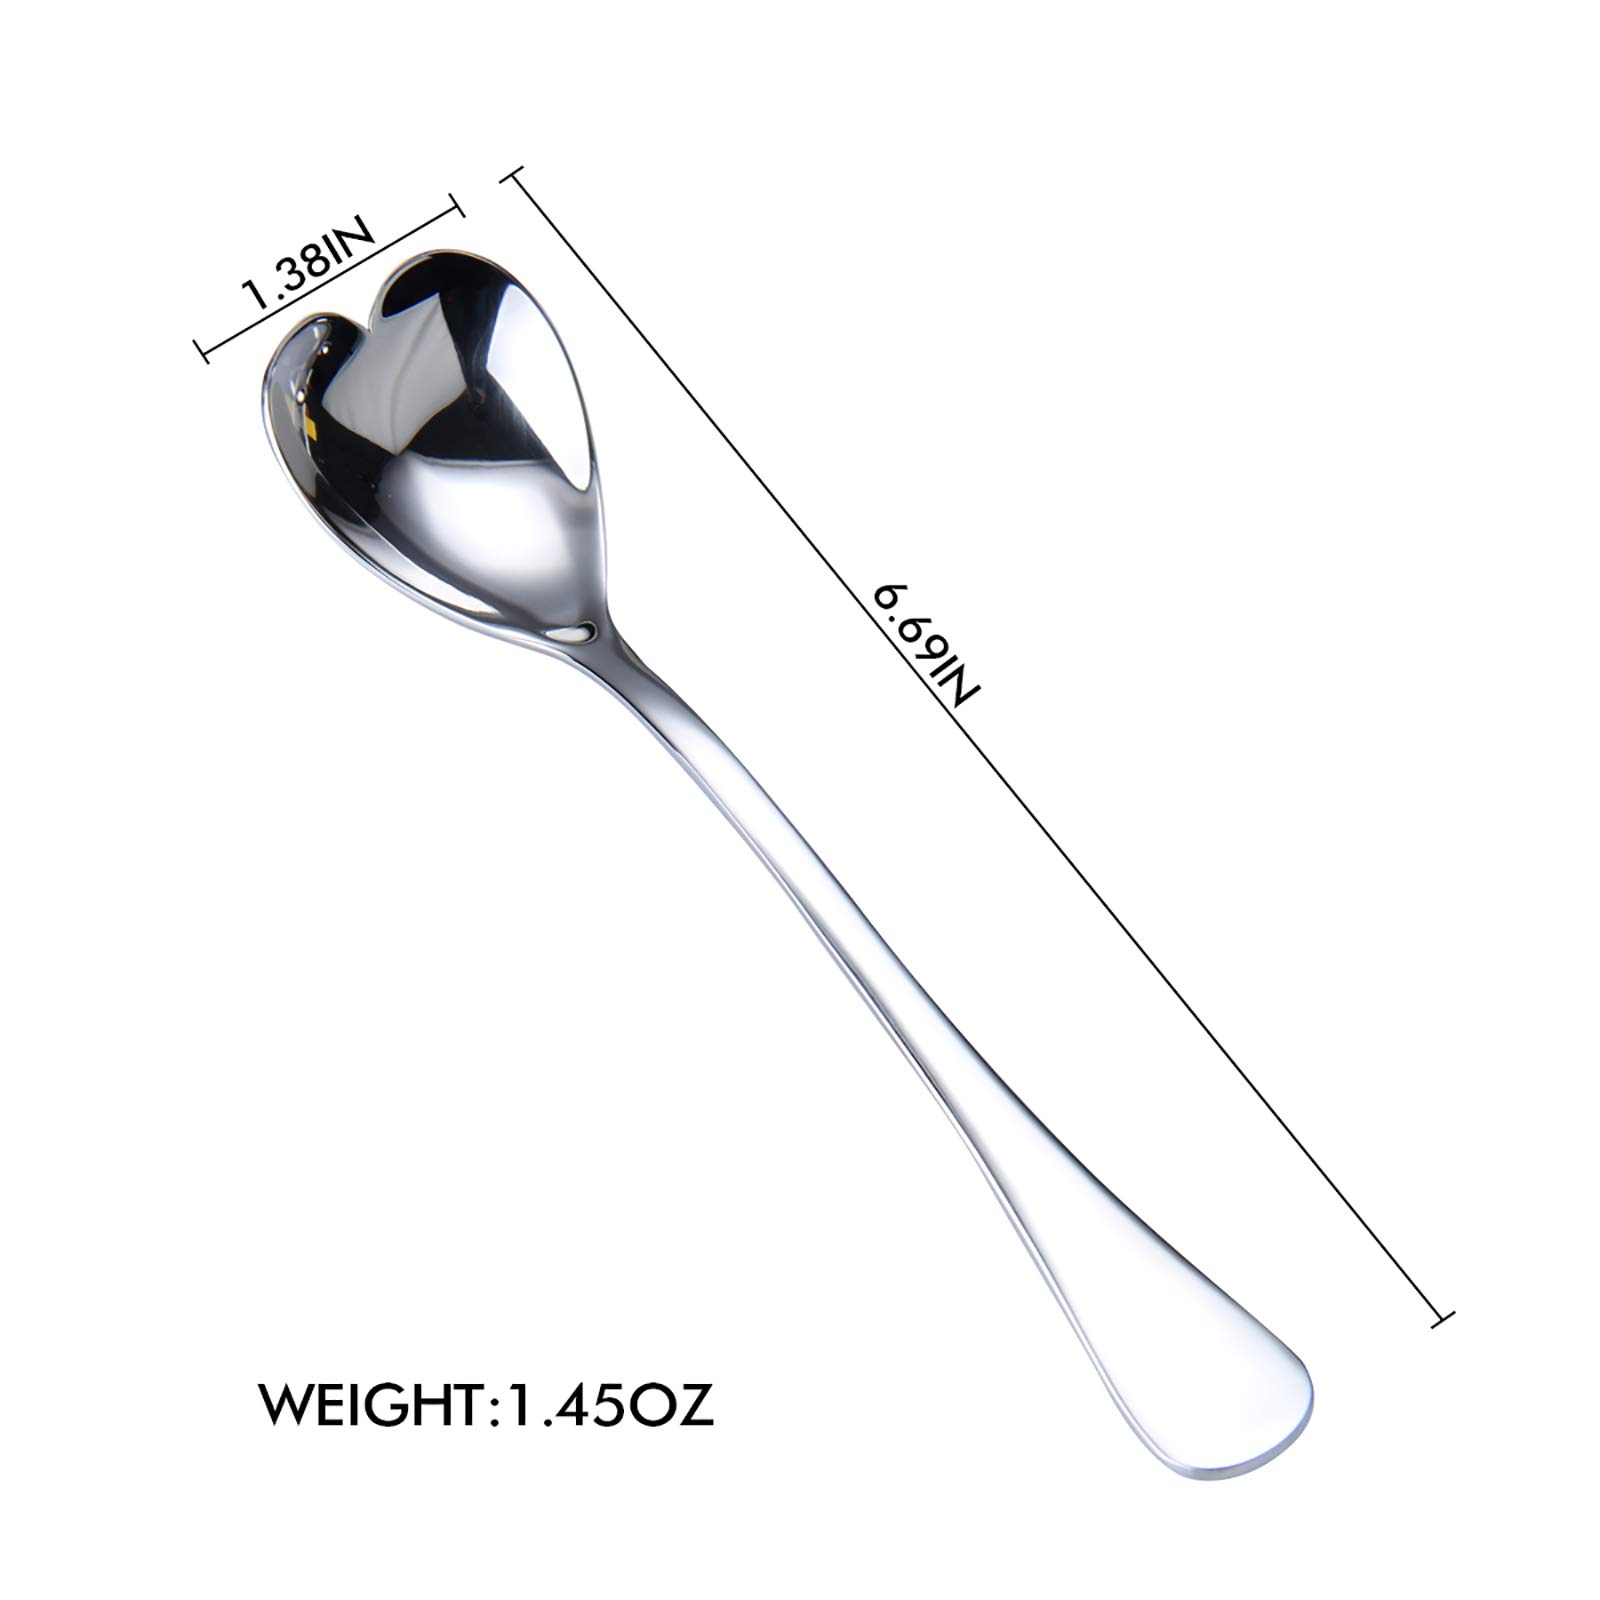 HISSF Heart Shaped Spoons, 18/10 Stainless Steel Spoon Set 4 Pack, 6.7 inches, Dessert Spoon, Ice Cream Spoons, for Tea, Cocktail, Sugar